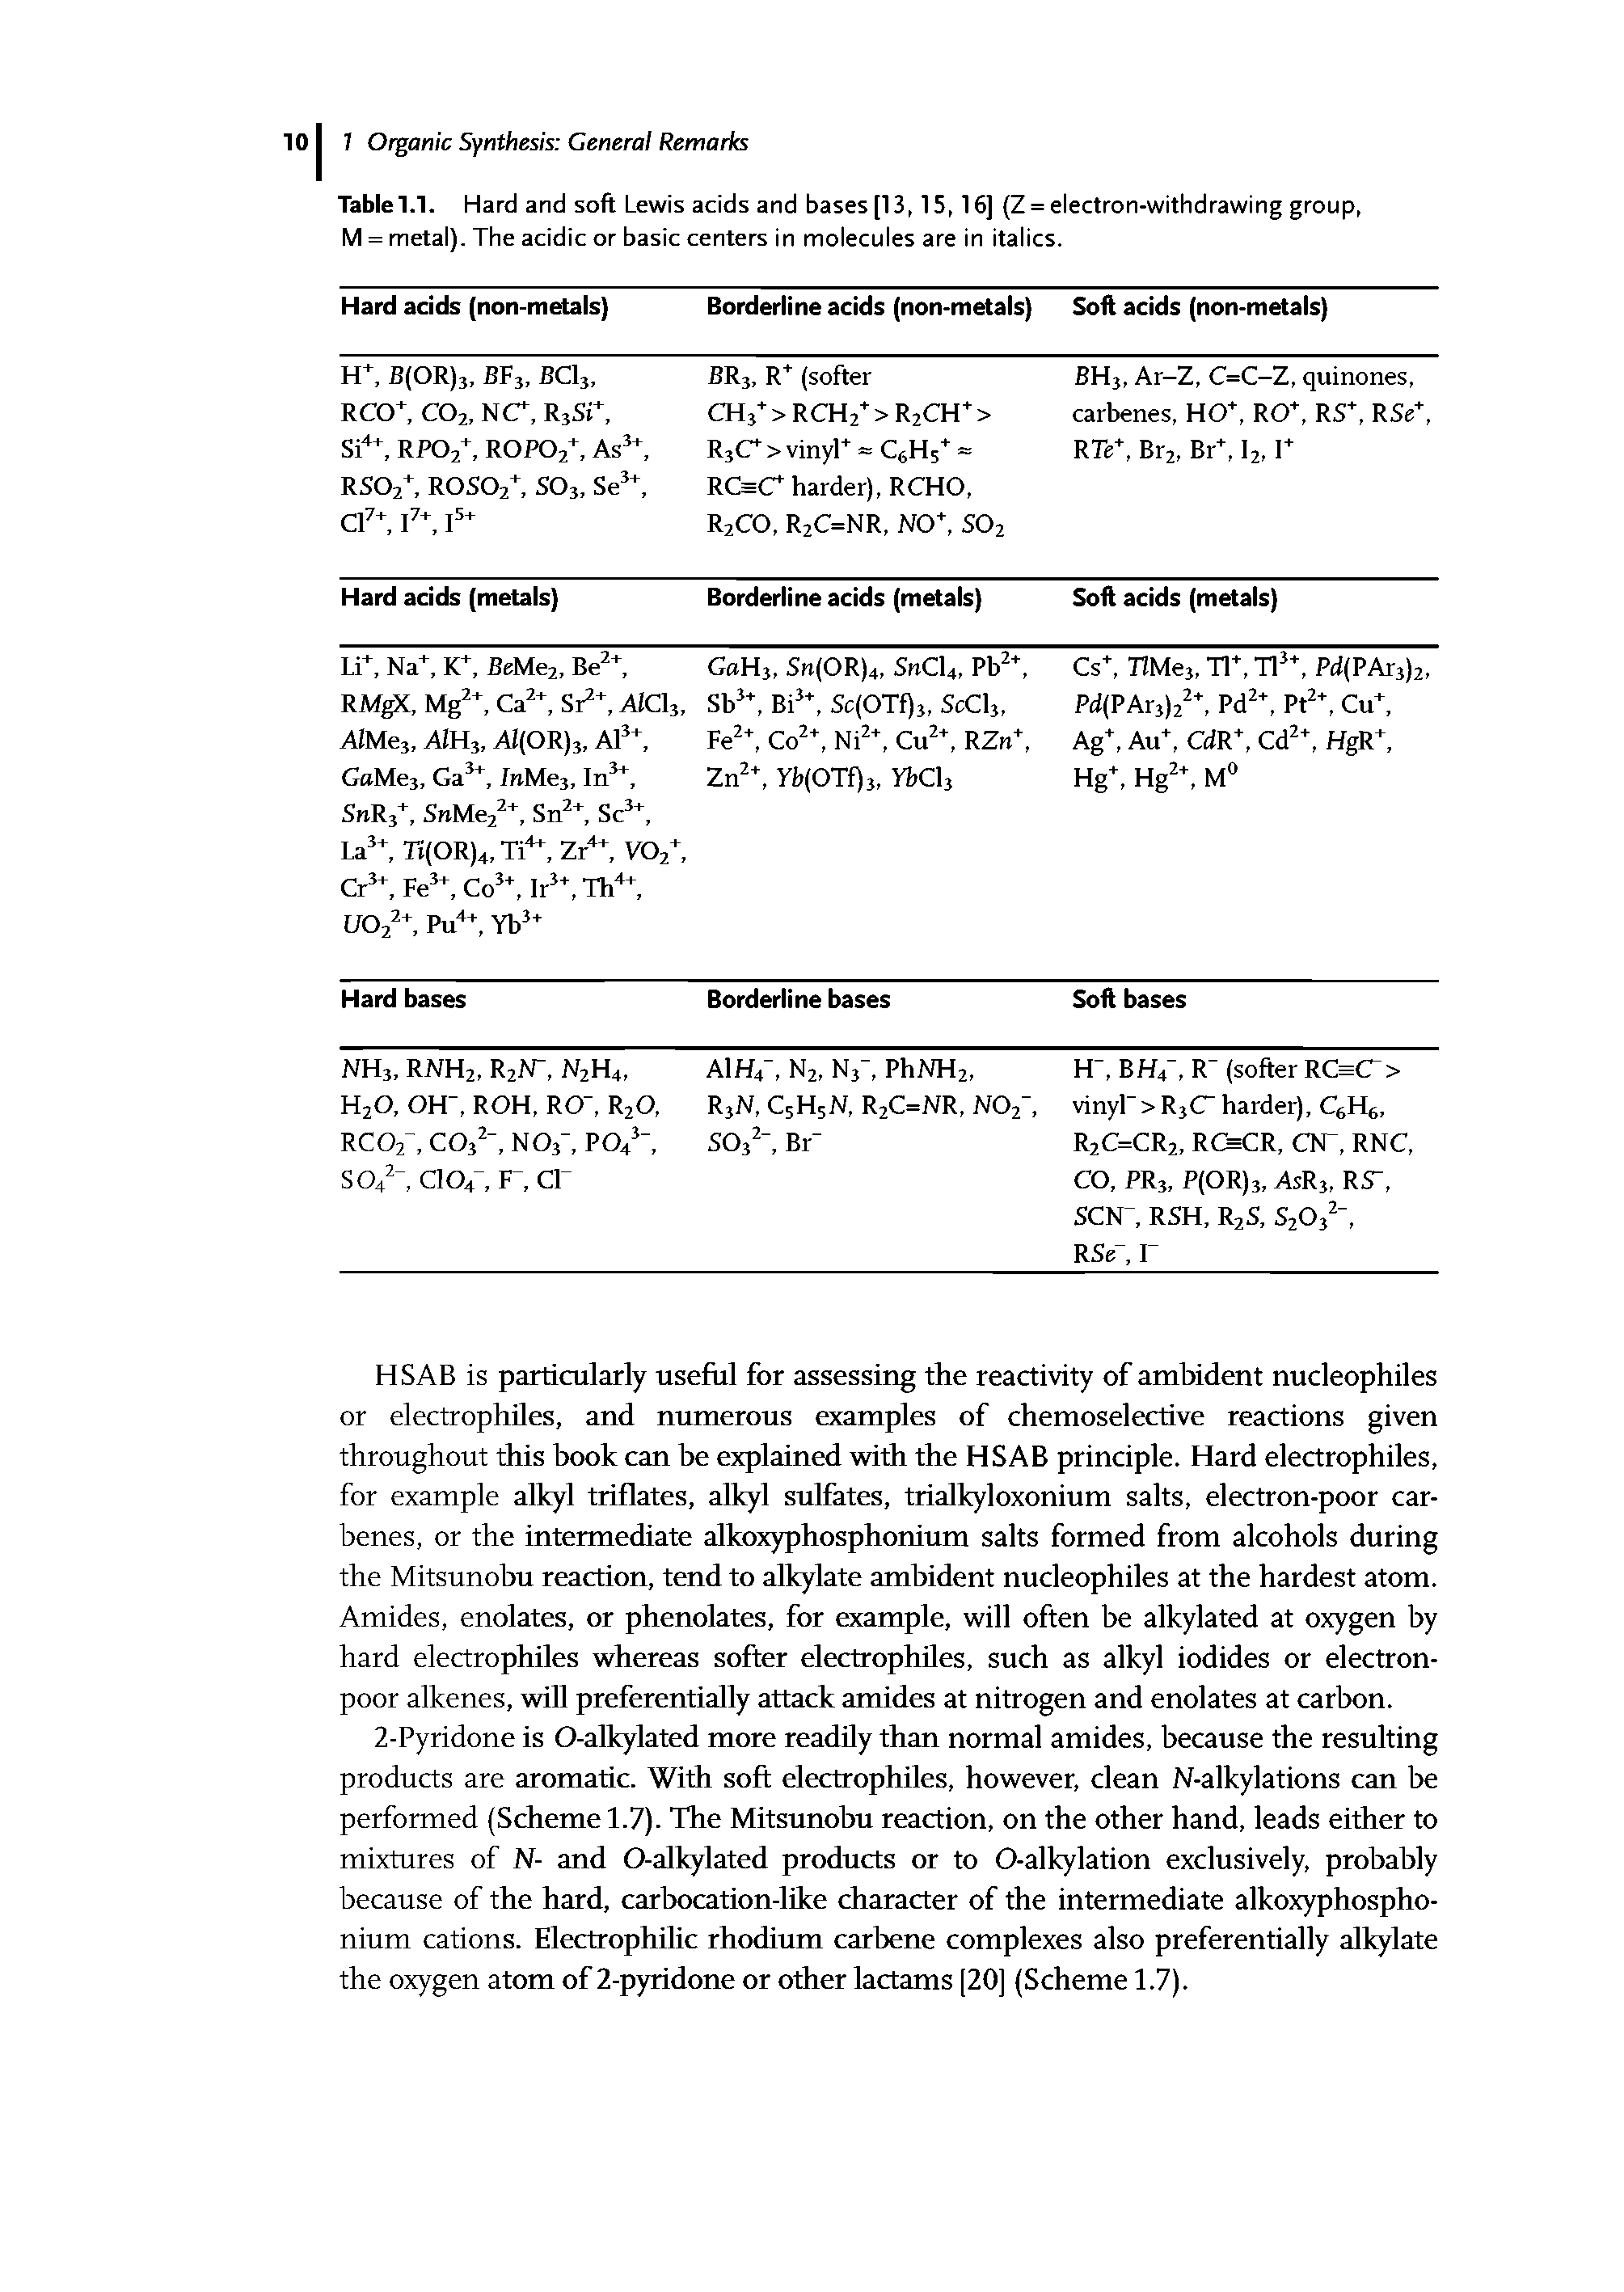 Table 1.1. Hard and soft Lewis acids and bases [13,15,16] (Z = electron-withdrawing group, M = metal). The acidic or basic centers in molecules are in italics.